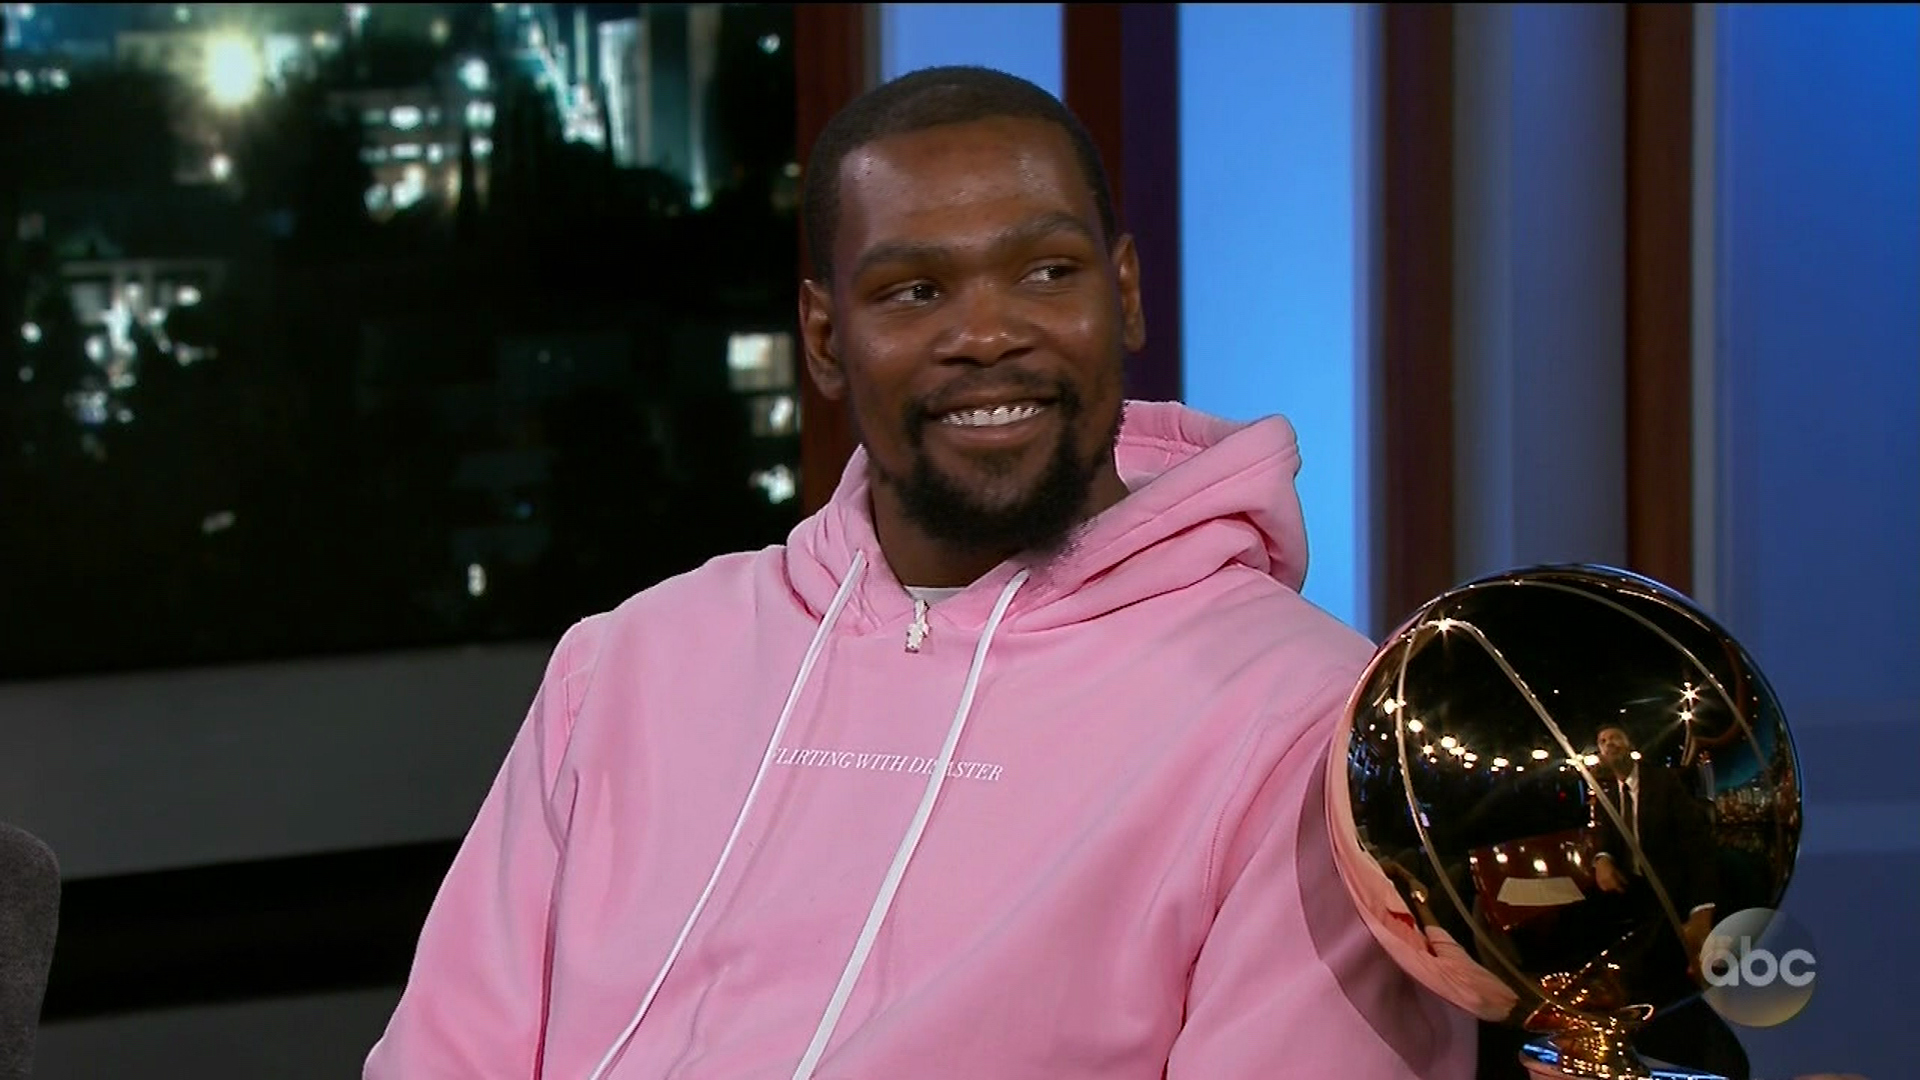 Kevin Durant during an appearance on ABC's Jimmy Kimmel Live!'